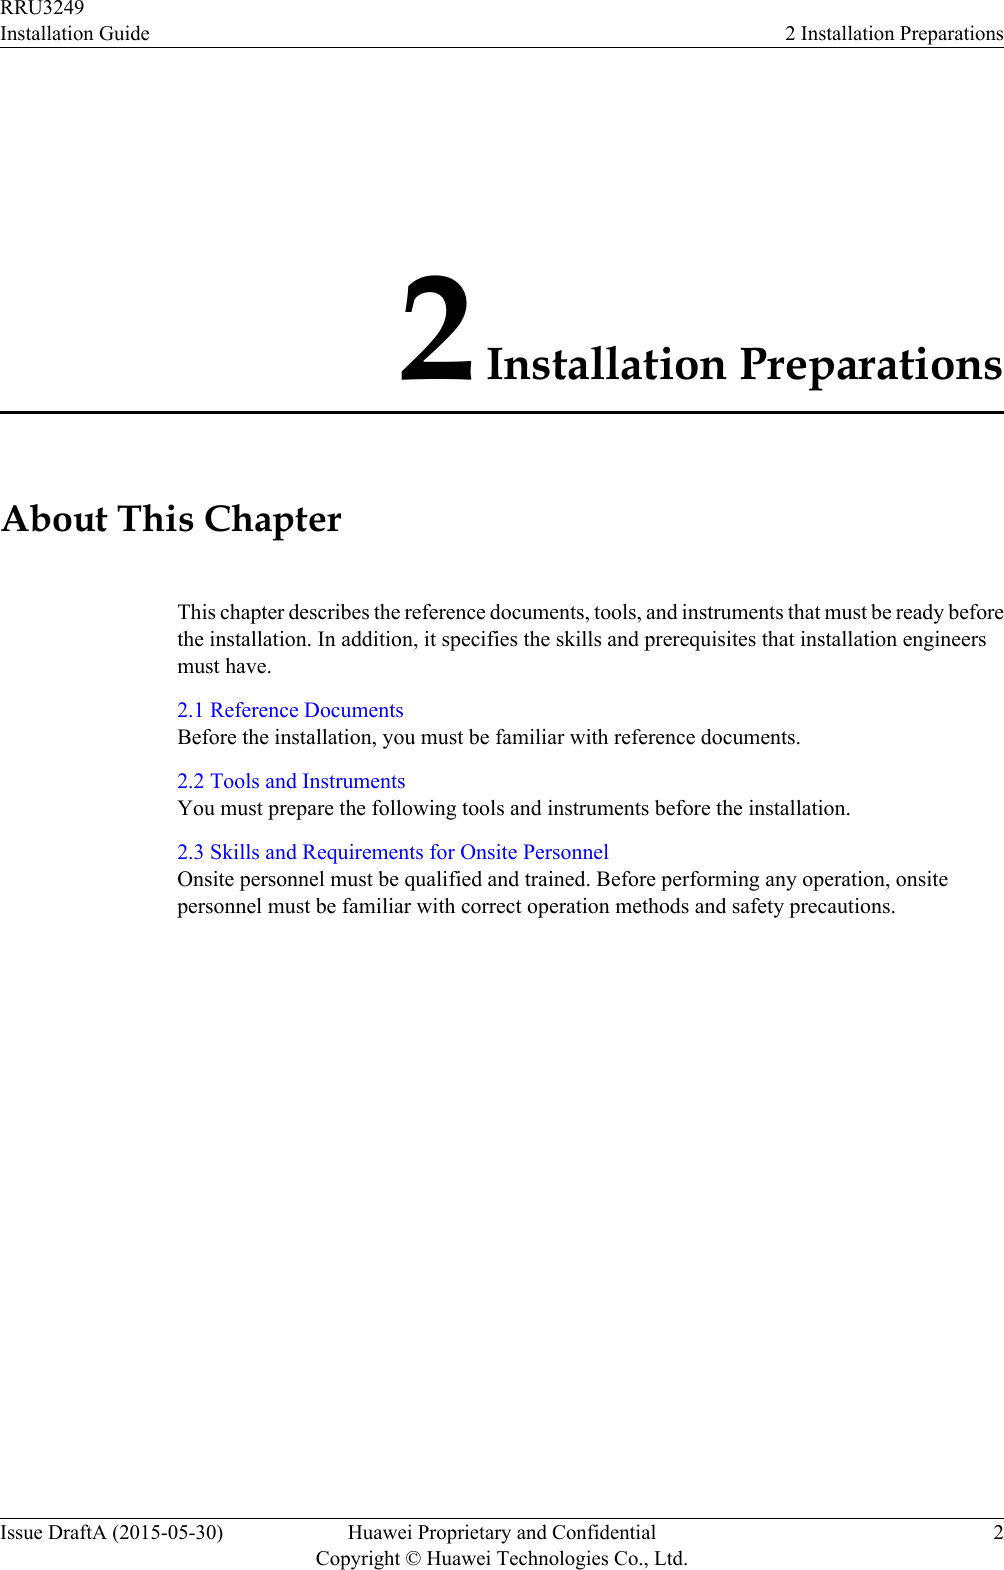 2 Installation PreparationsAbout This ChapterThis chapter describes the reference documents, tools, and instruments that must be ready beforethe installation. In addition, it specifies the skills and prerequisites that installation engineersmust have.2.1 Reference DocumentsBefore the installation, you must be familiar with reference documents.2.2 Tools and InstrumentsYou must prepare the following tools and instruments before the installation.2.3 Skills and Requirements for Onsite PersonnelOnsite personnel must be qualified and trained. Before performing any operation, onsitepersonnel must be familiar with correct operation methods and safety precautions.RRU3249Installation Guide 2 Installation PreparationsIssue DraftA (2015-05-30) Huawei Proprietary and ConfidentialCopyright © Huawei Technologies Co., Ltd.2